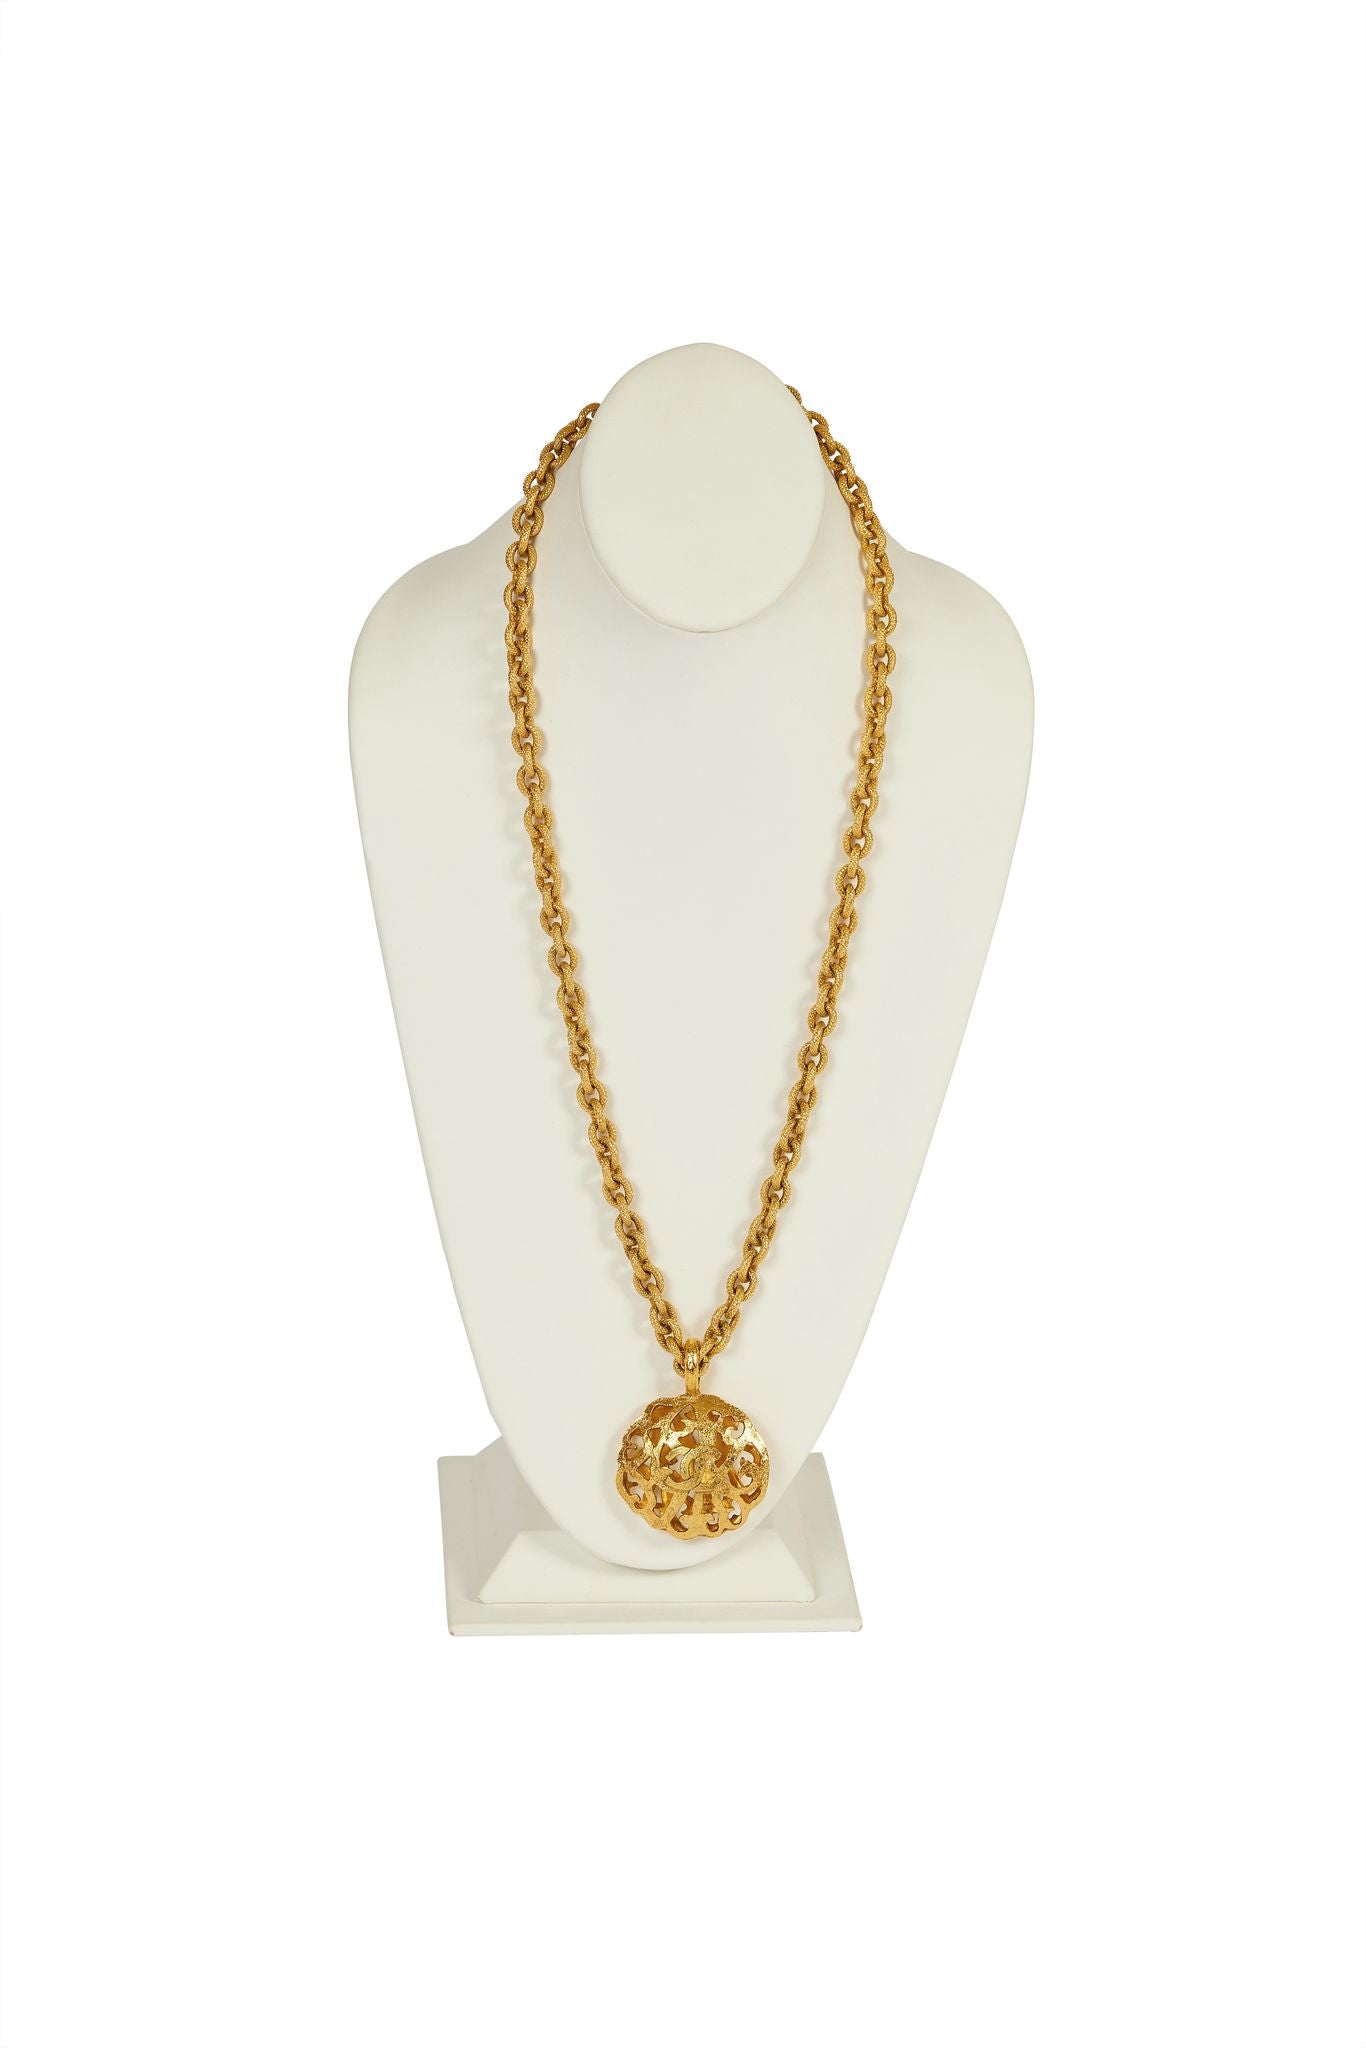 CHANEL, Jewelry, Chanel Vintage Faux Pearl Necklace Extra Long Necklace  With Golden Round Logo M